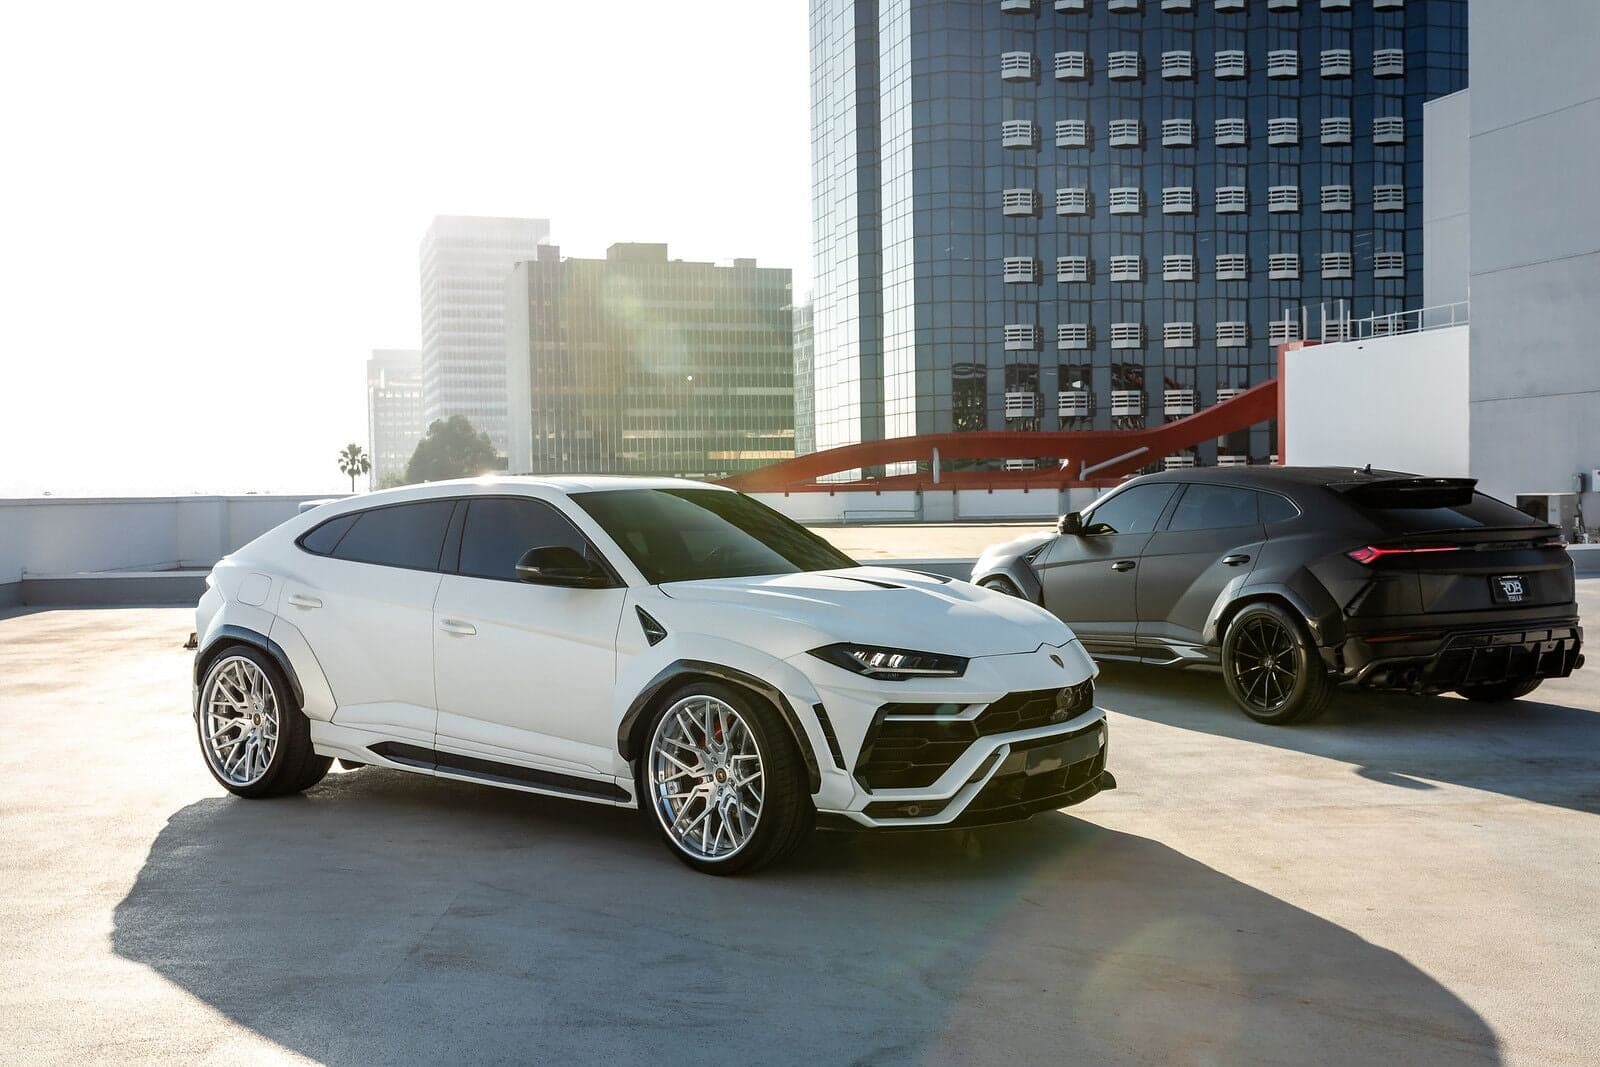 840-HP Widebody Lamborghini Urus: For When a Normal Urus Is Just Too Subtle